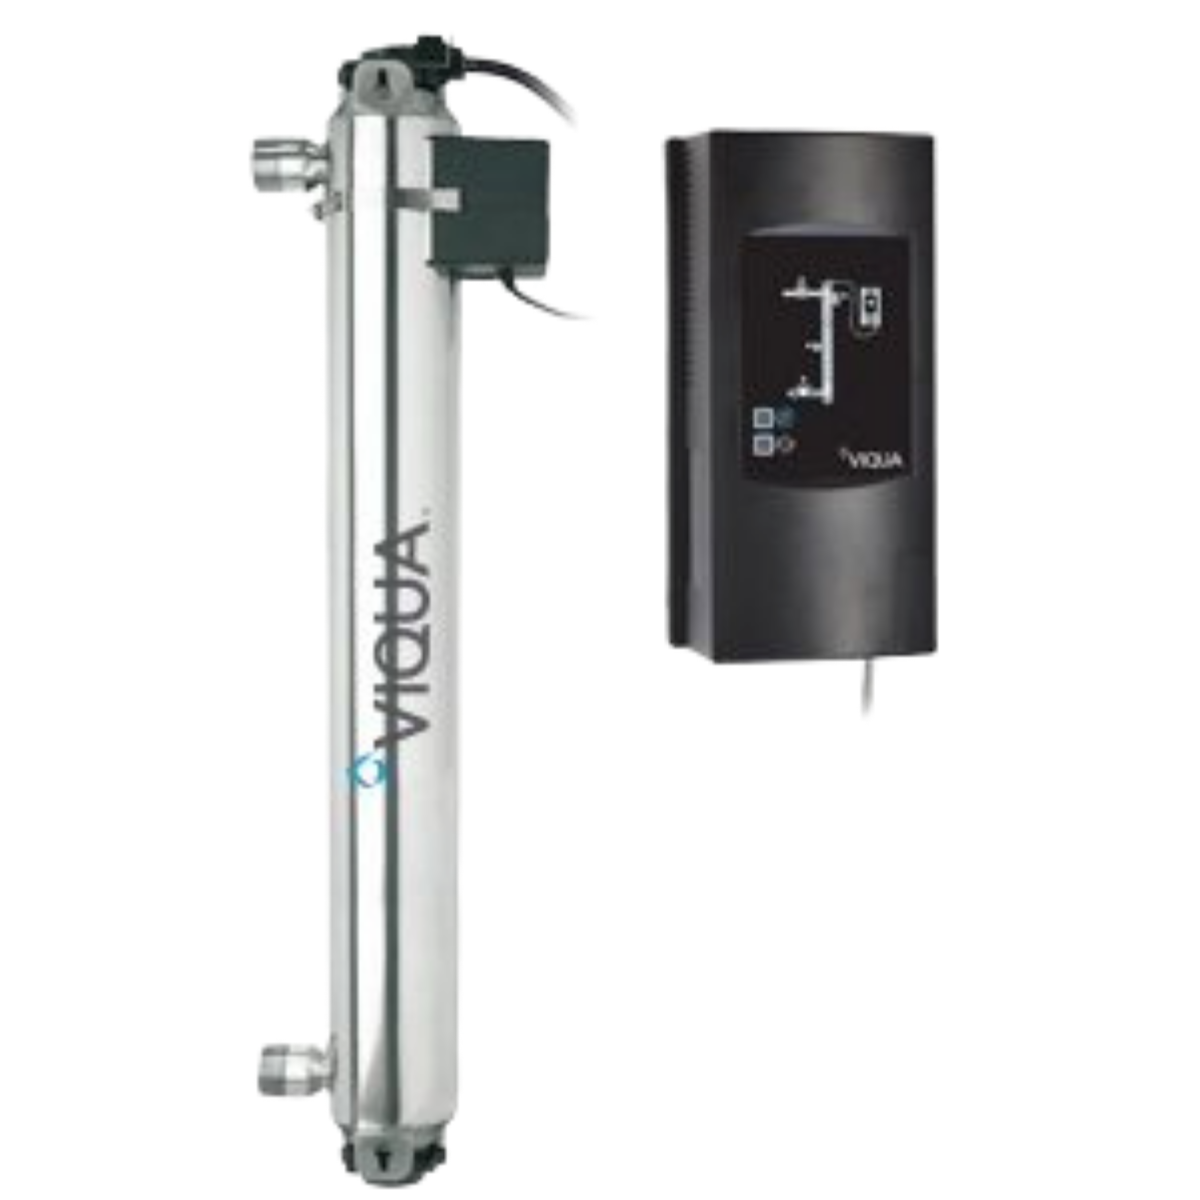 H+ PRO UV Water Disinfection System